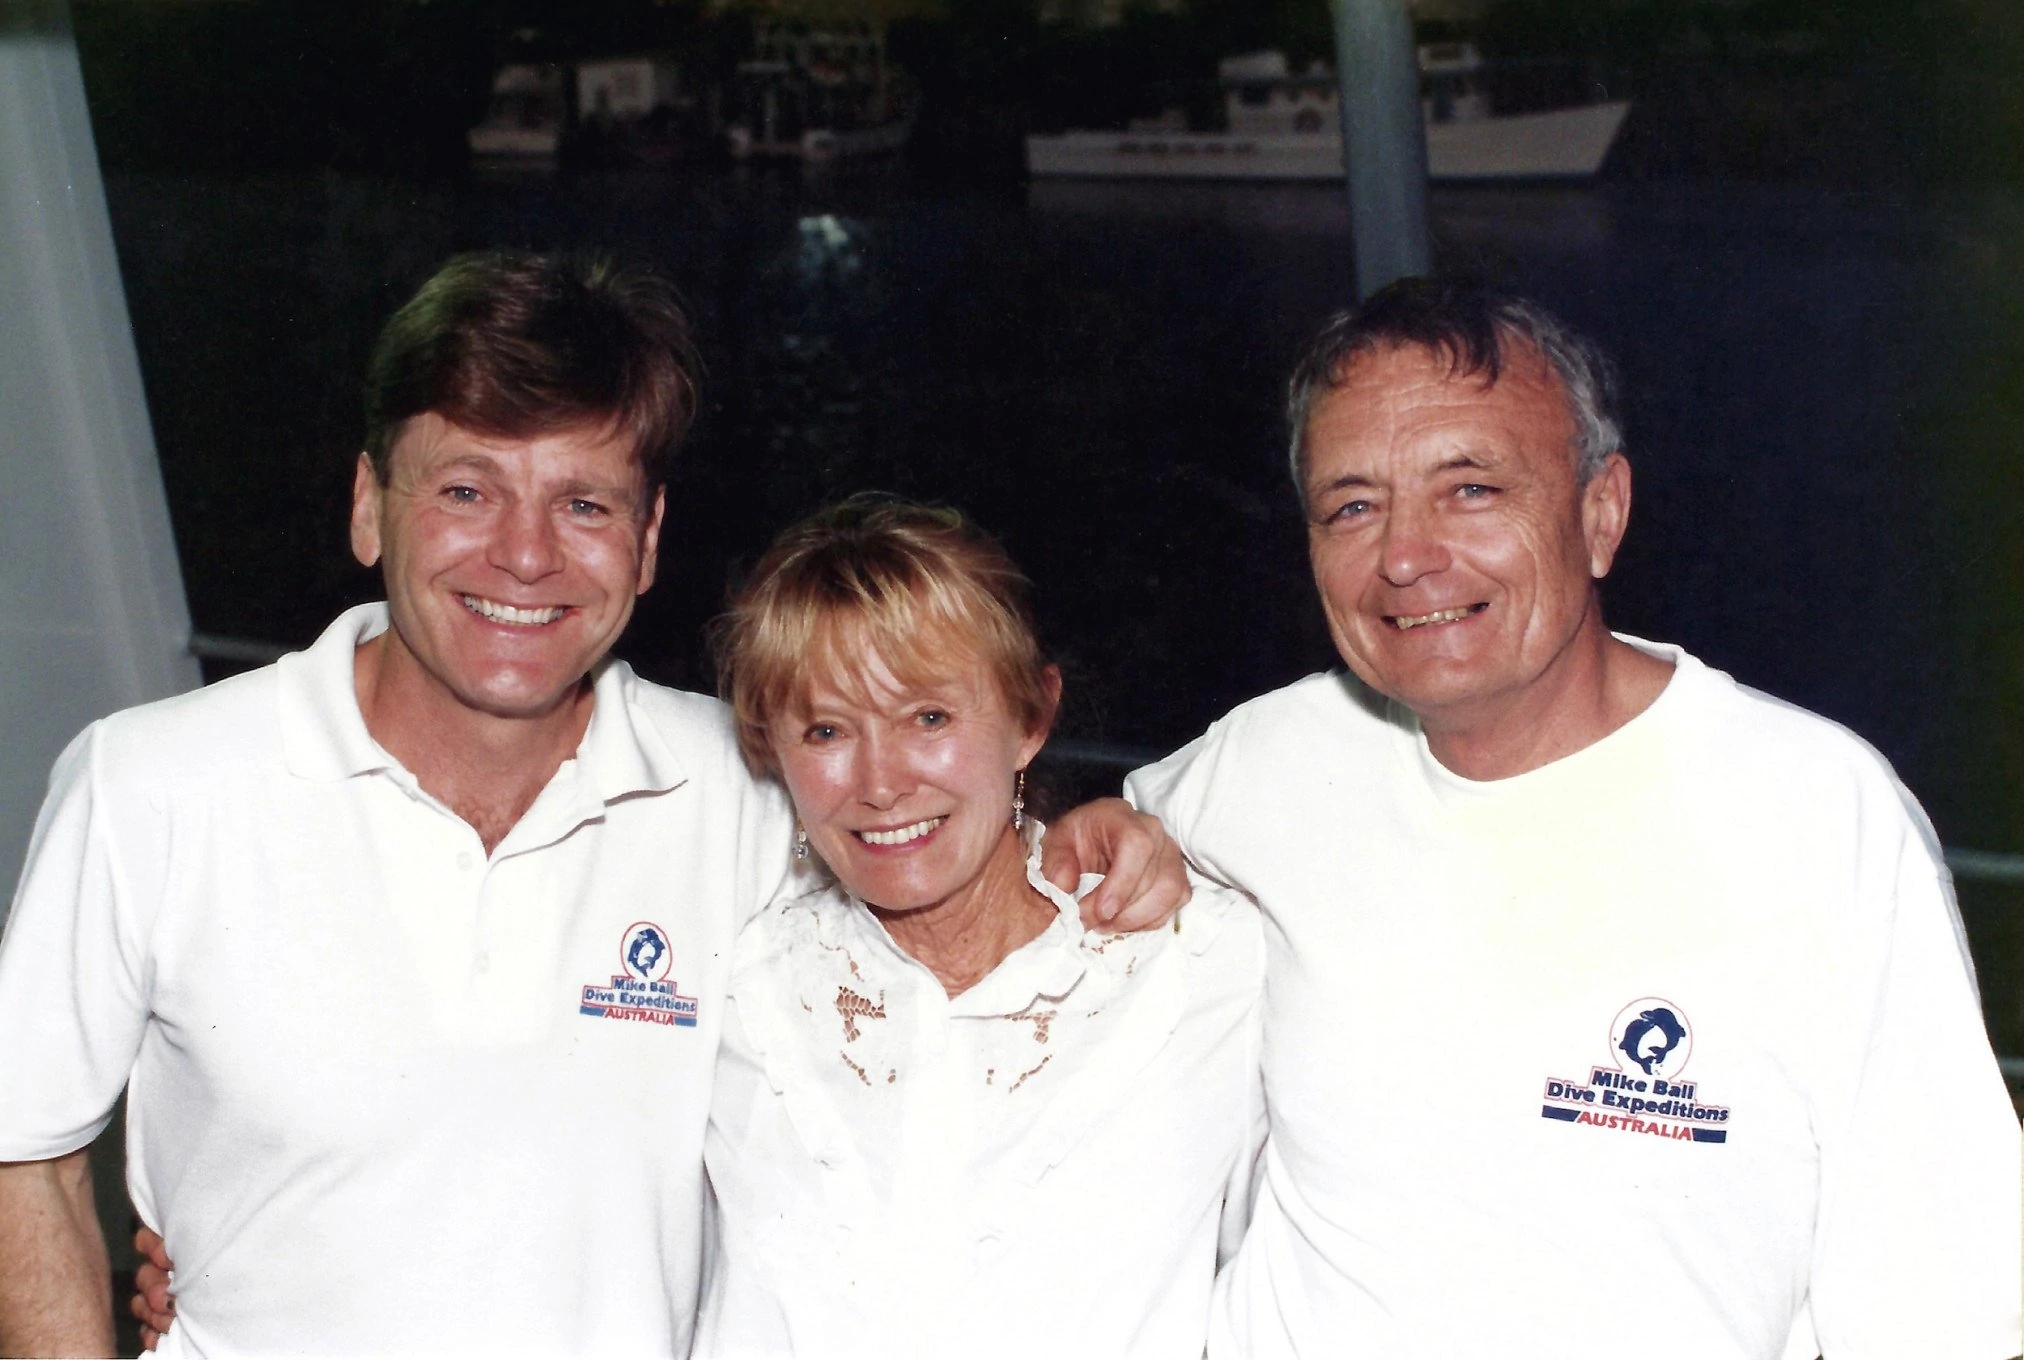 Mike Ball with Ron and Valarie Taylor